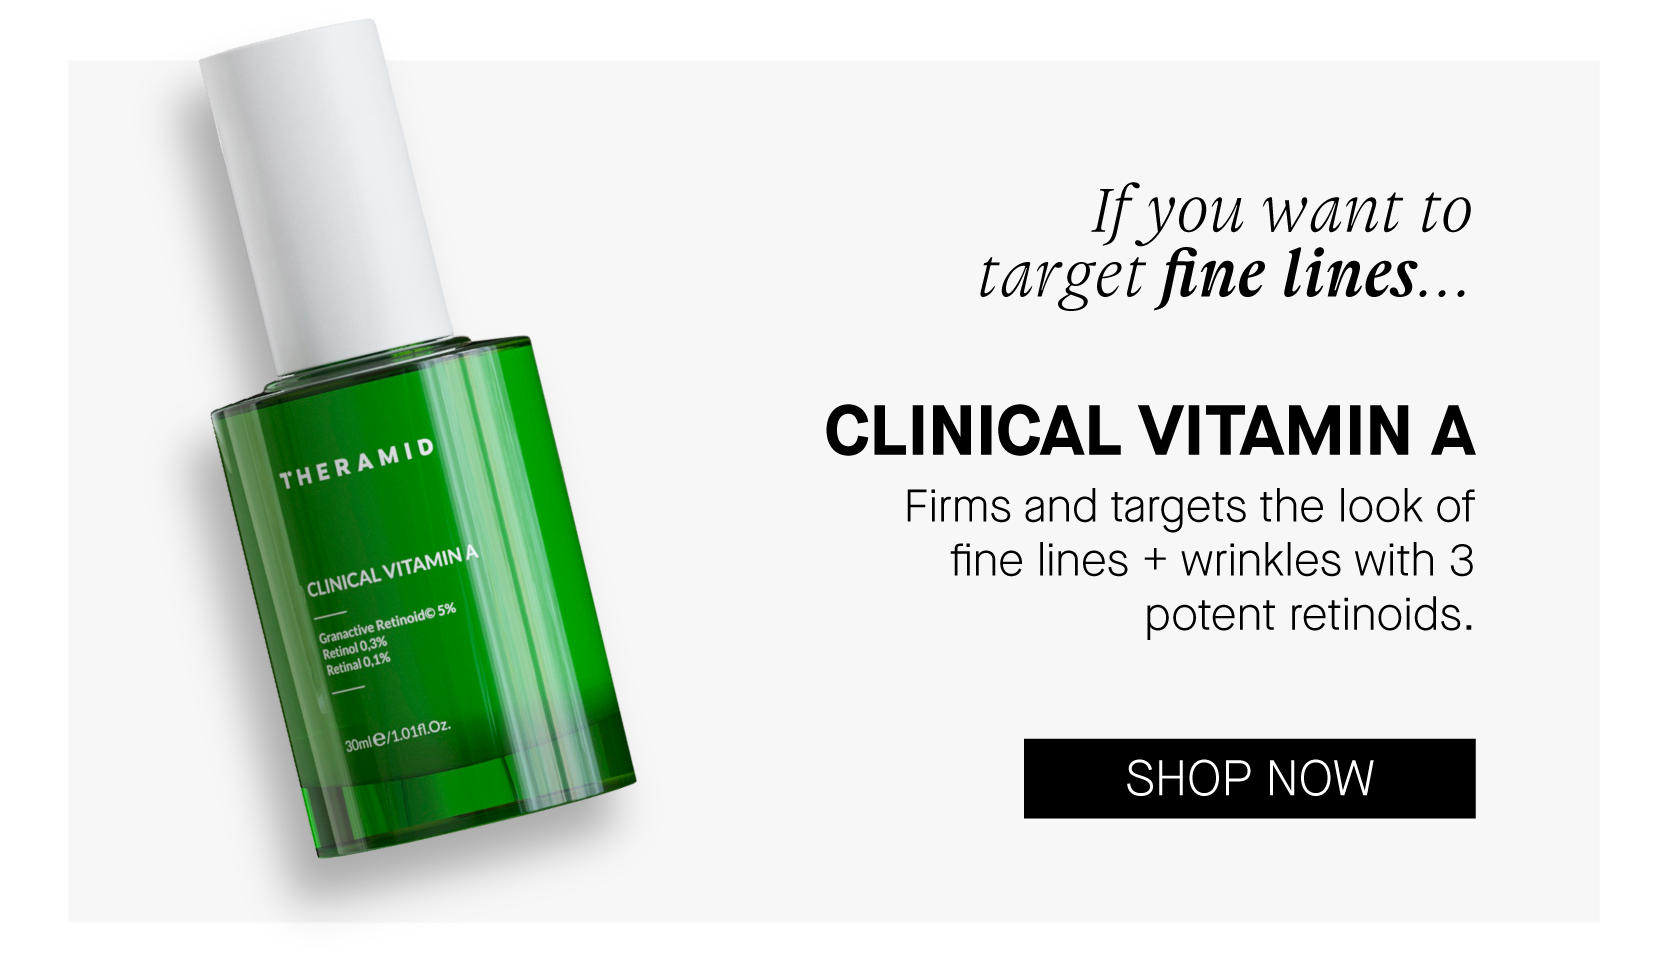  If you want to target fine lines... CLINICAL VITAMIN A Firms and targets the look of fine lines wrinkles with 3 potent retinoids. SHOP NOW 